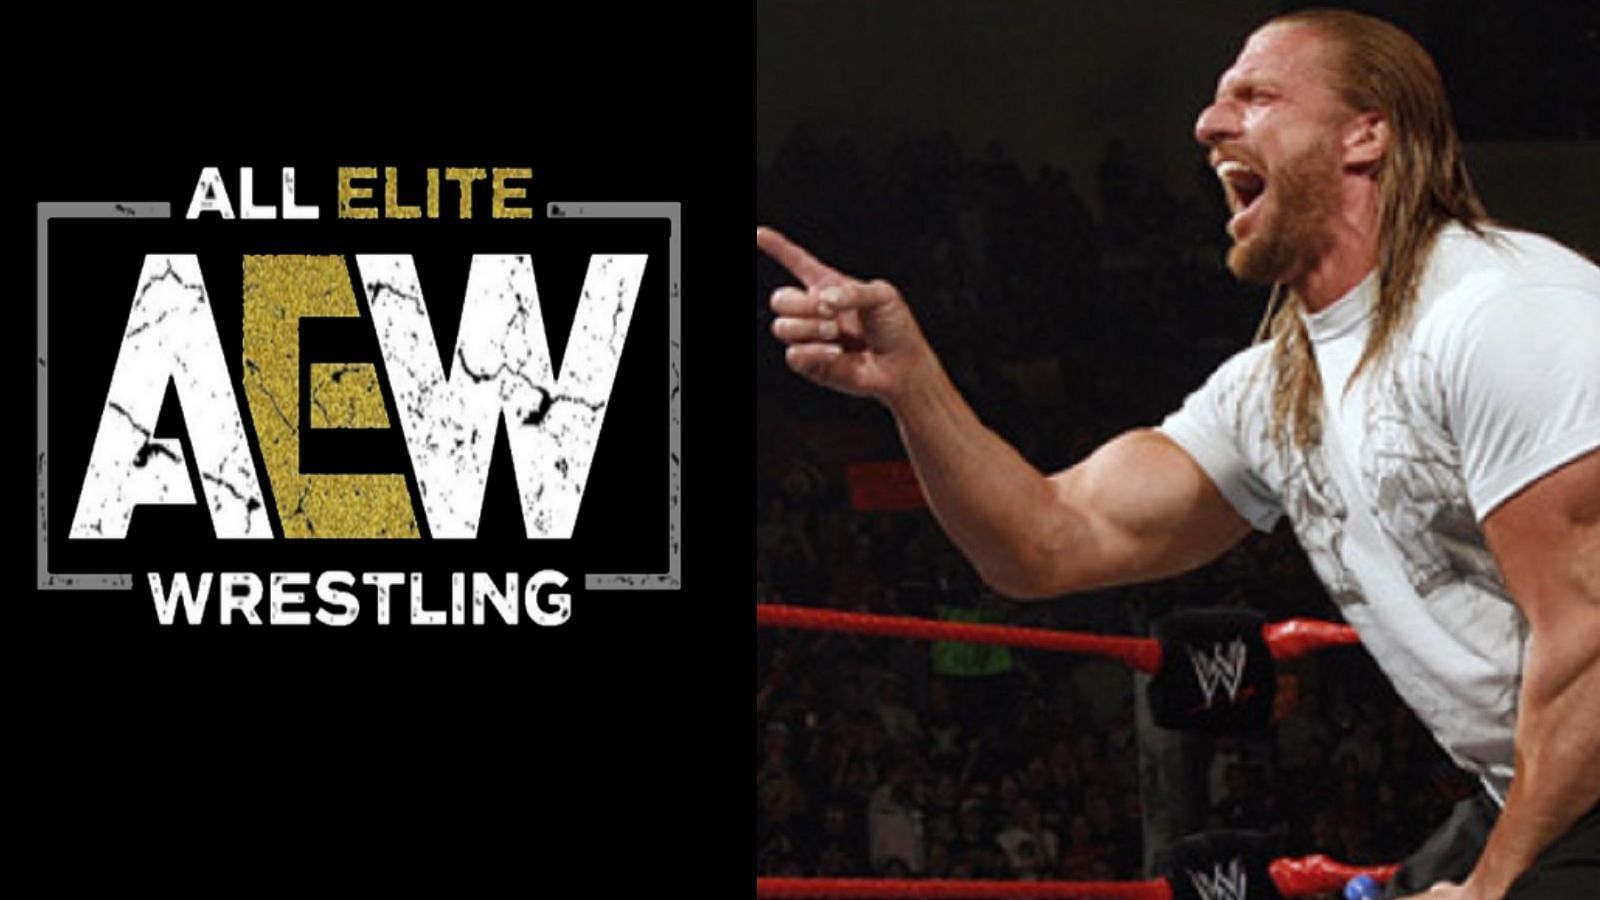 The Game once took quite the shot at AEW.